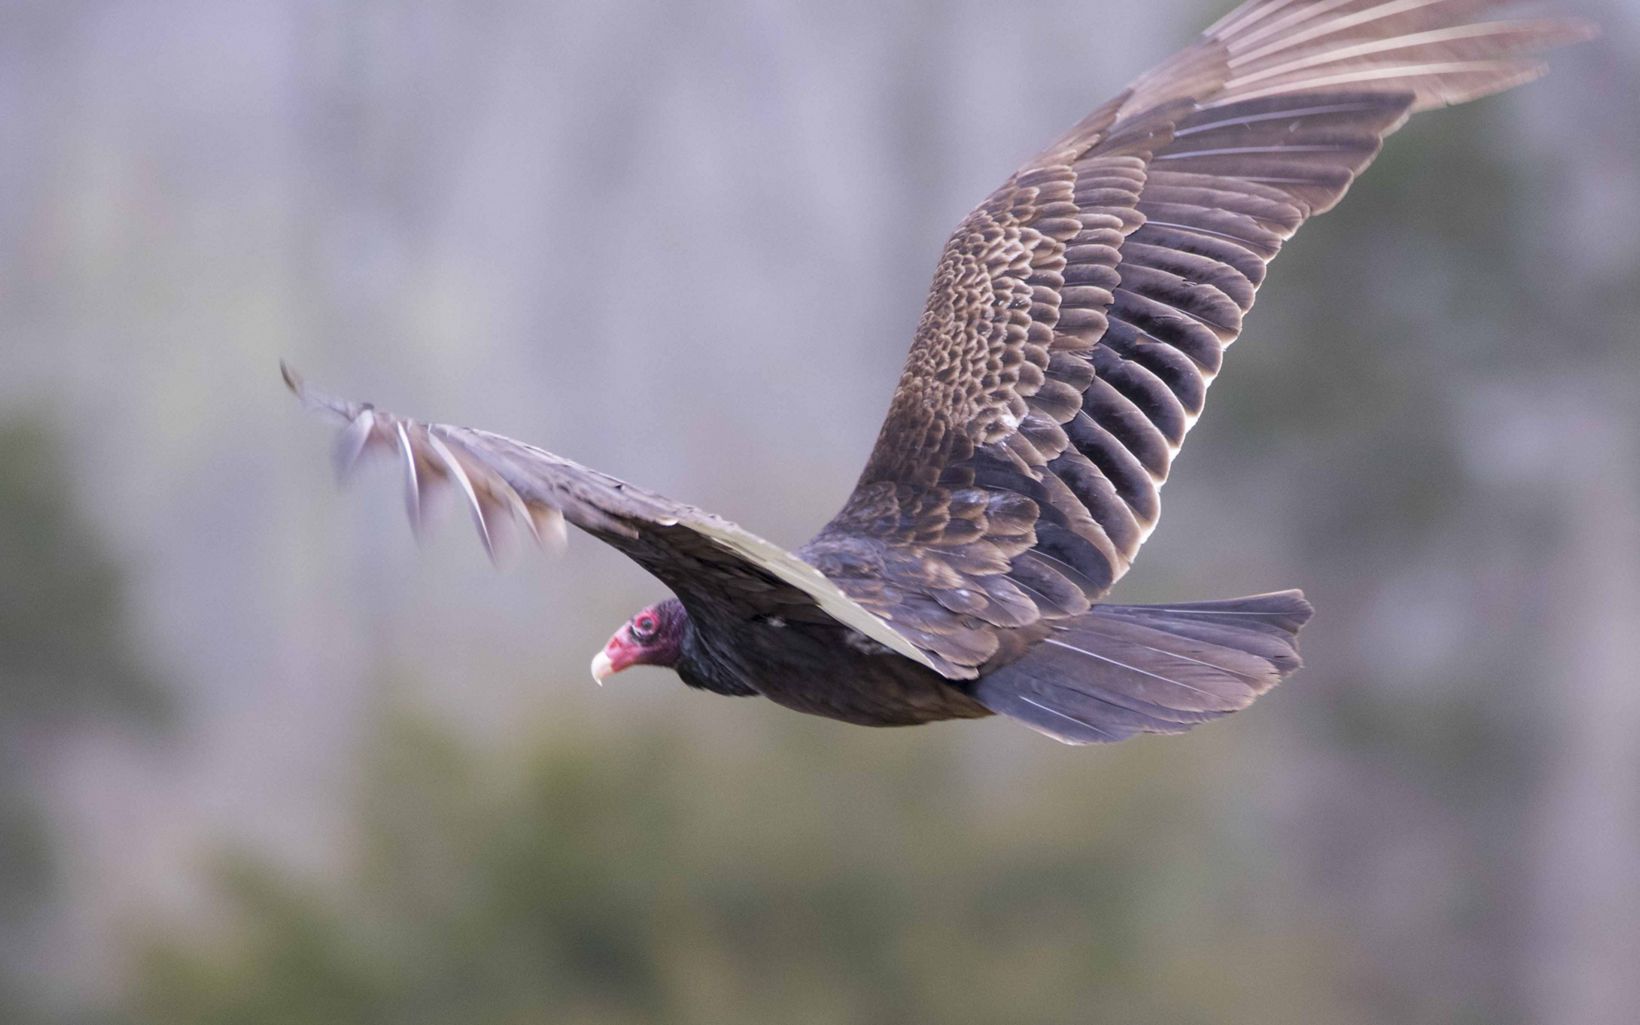 Turkey Vulture (Cathartes aura) This trail's namesake. Also known as buzzards, these large birds have a six-foot wingspan. They can be seen gliding on the air currents high in the sky.   © Rick Conner